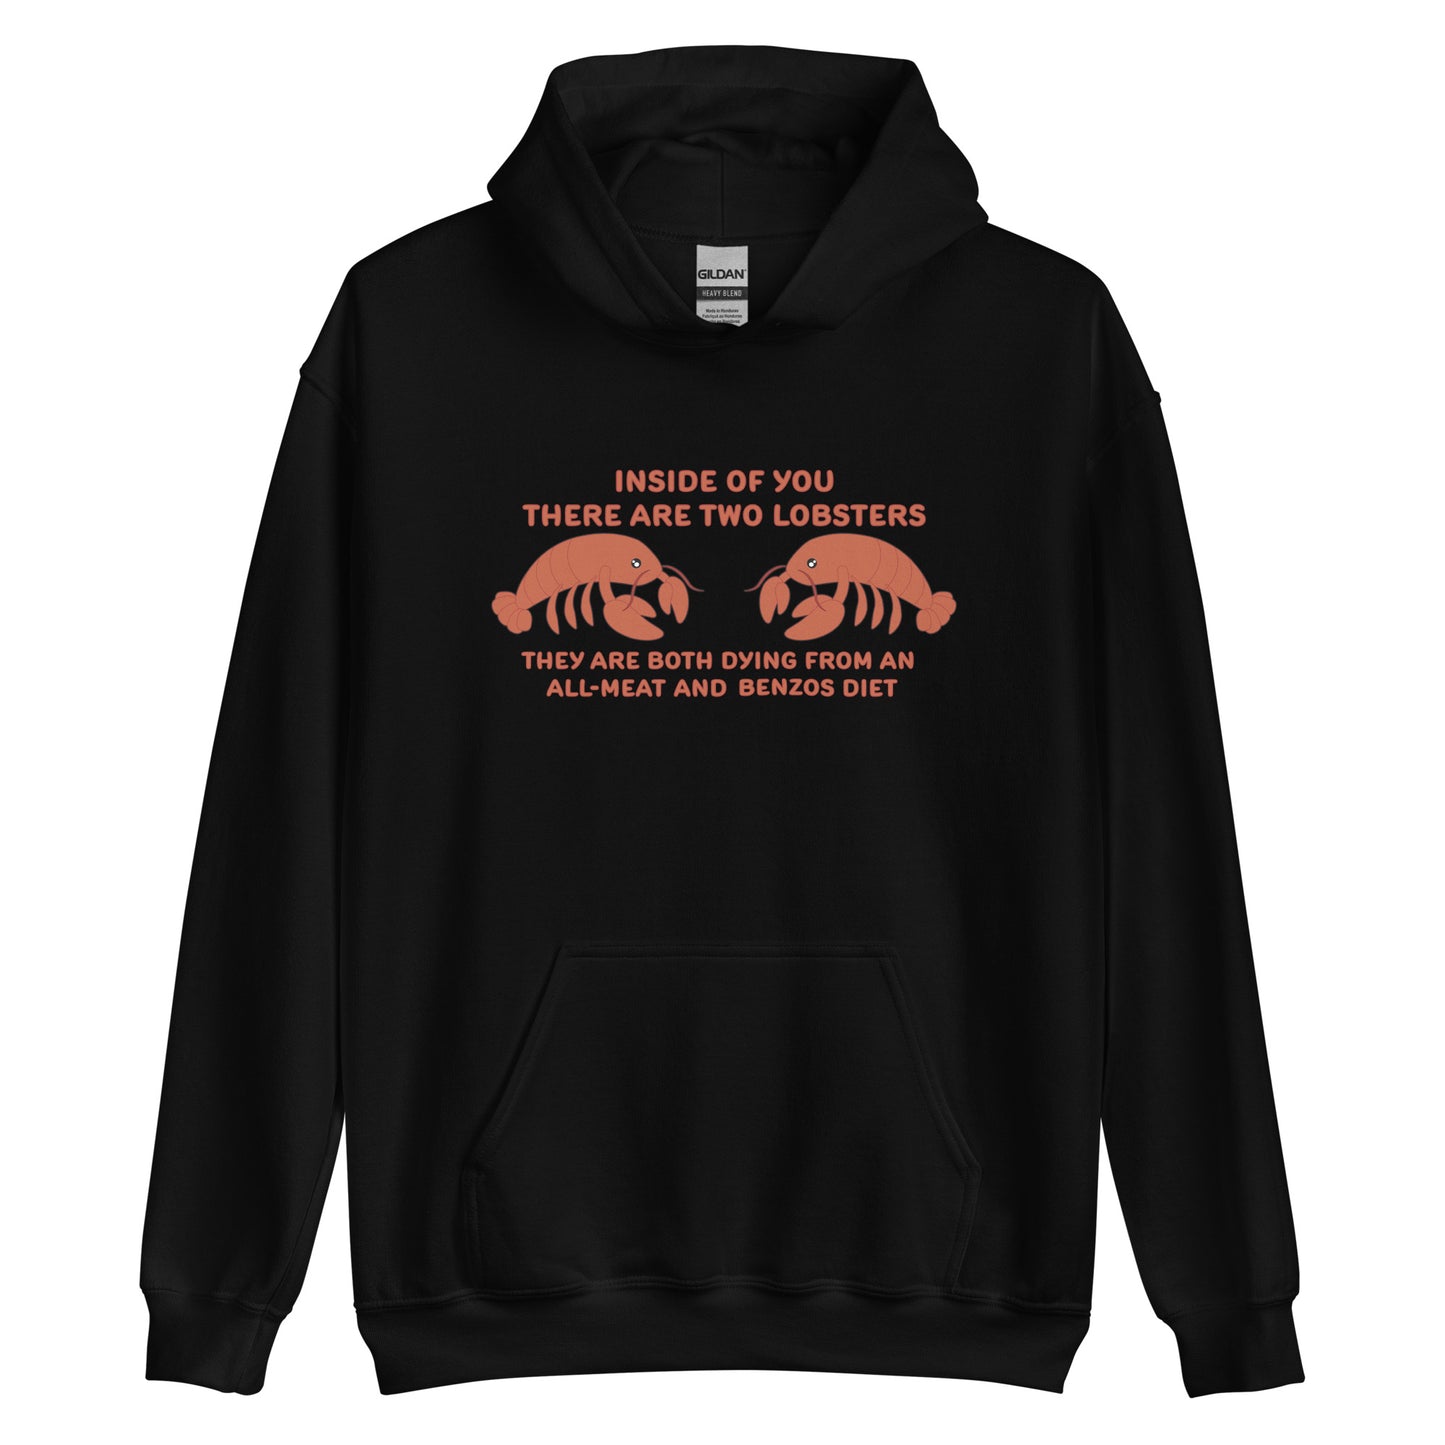 A black hooded sweatshirt featuring an illustration of two lobsters. Text around the lobster reads "Inside Of You There Are Two Lobsters" "They are both dying from an all-meat and benzos diet."